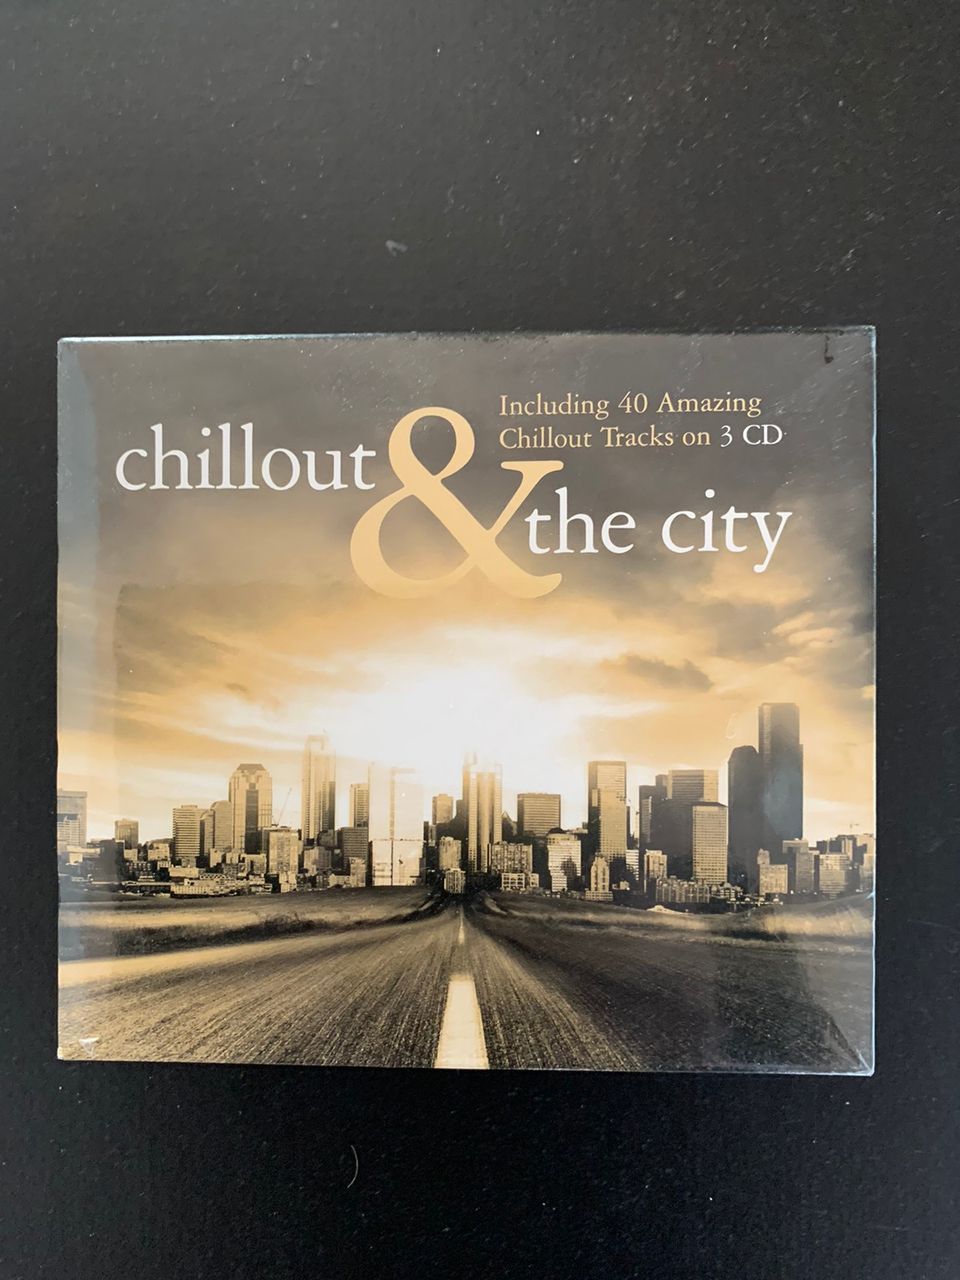 Chillout & and the city